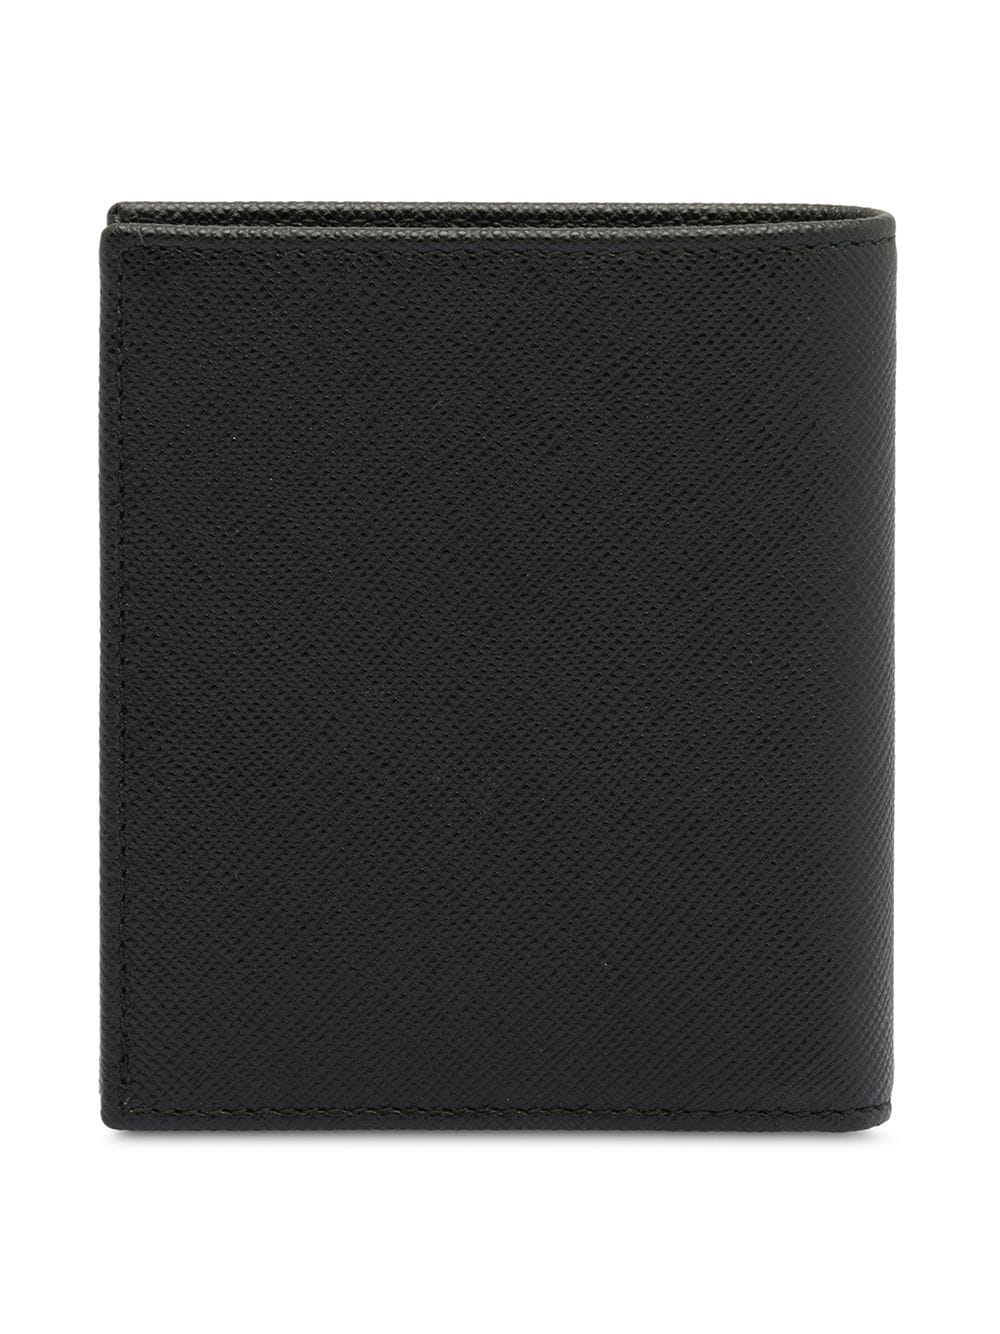 Saffiano leather wallet<BR/><BR/><BR/>